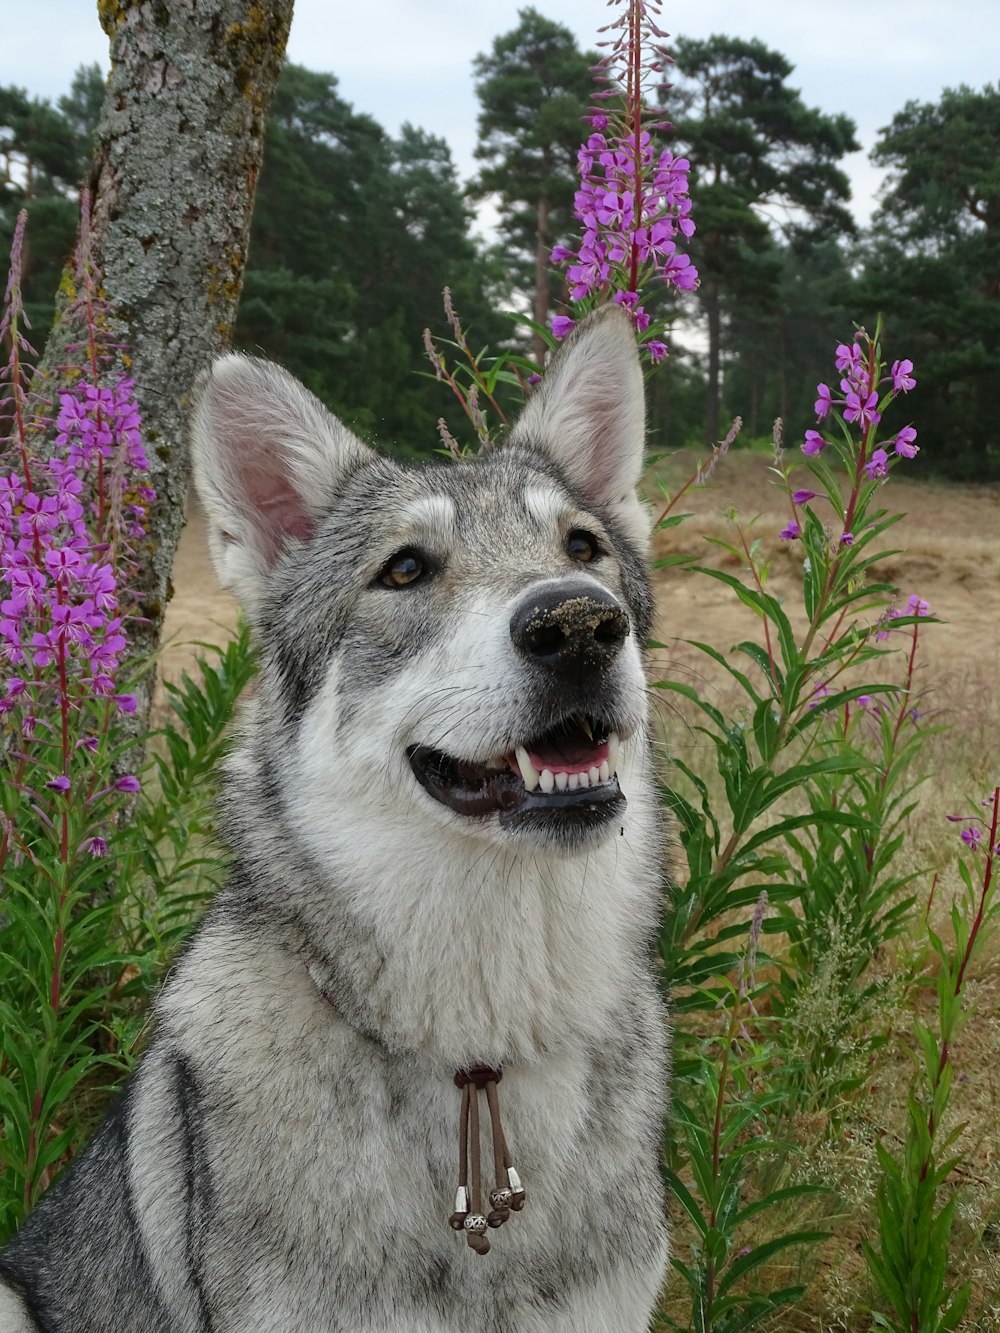 a dog with a chain in its mouth in a field of flowers